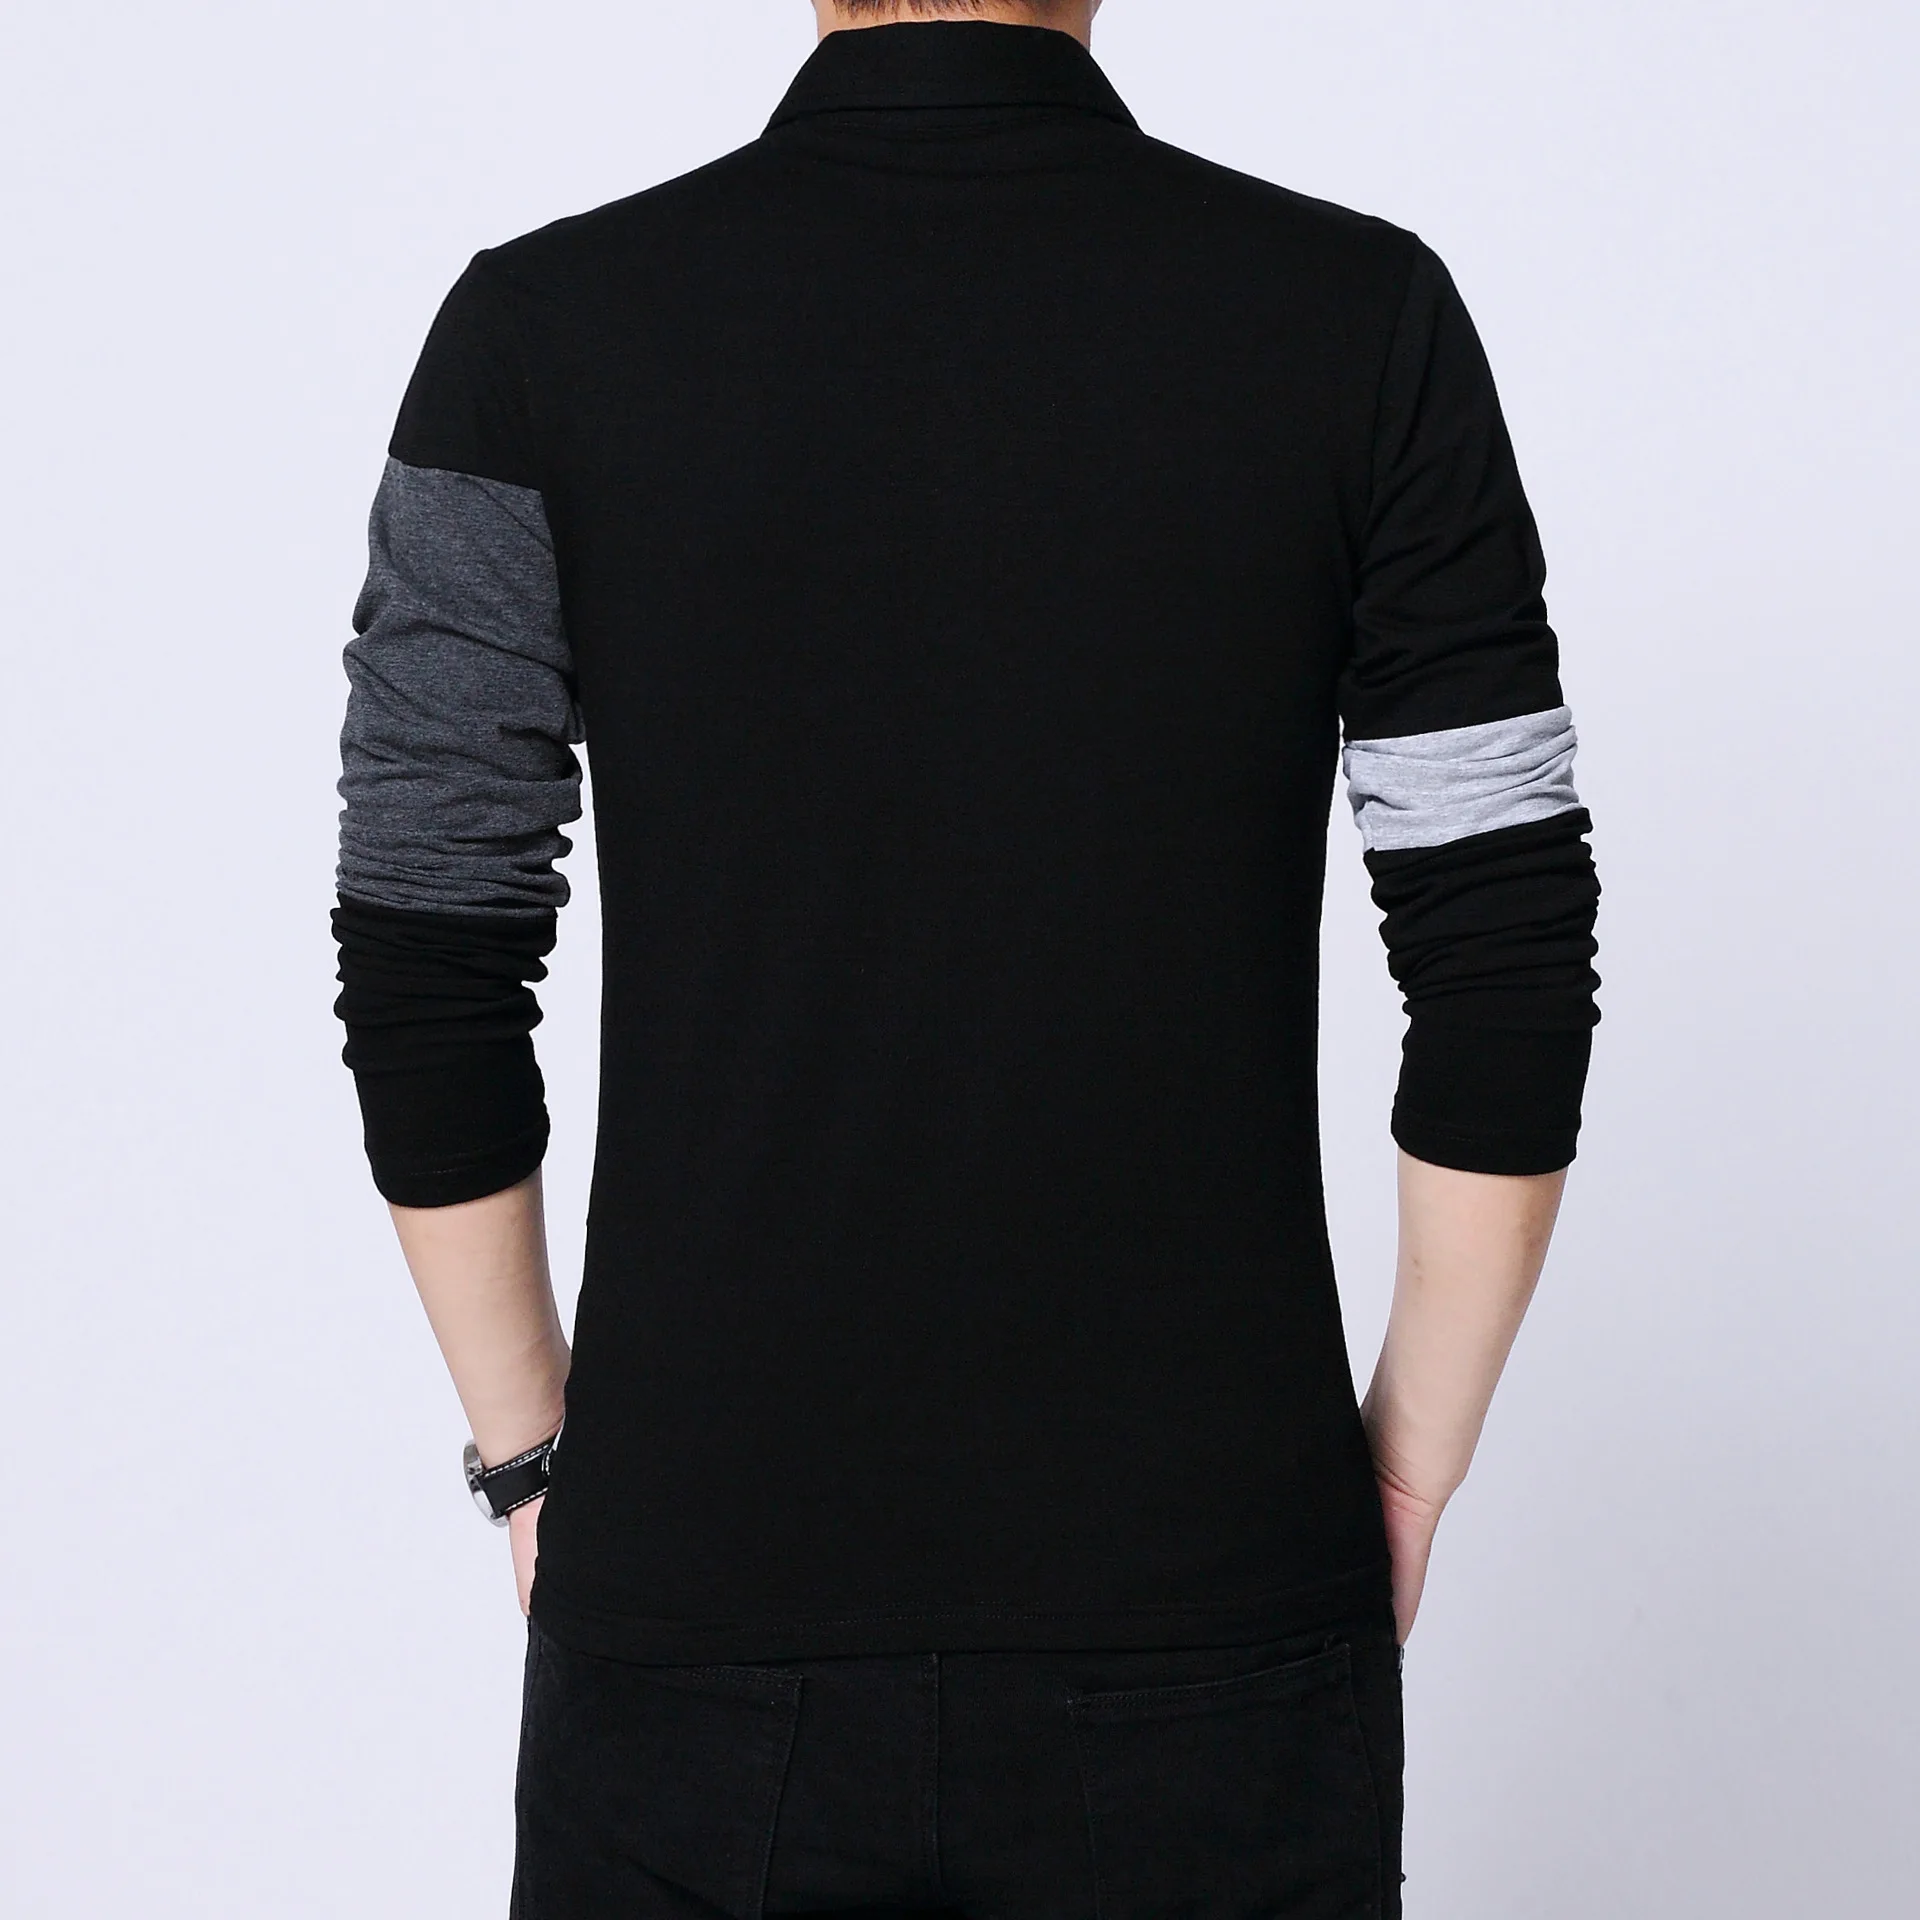 Lutratocro Men Contrast Color Slim Pullover Stitching Long-Sleeve T-Shirts